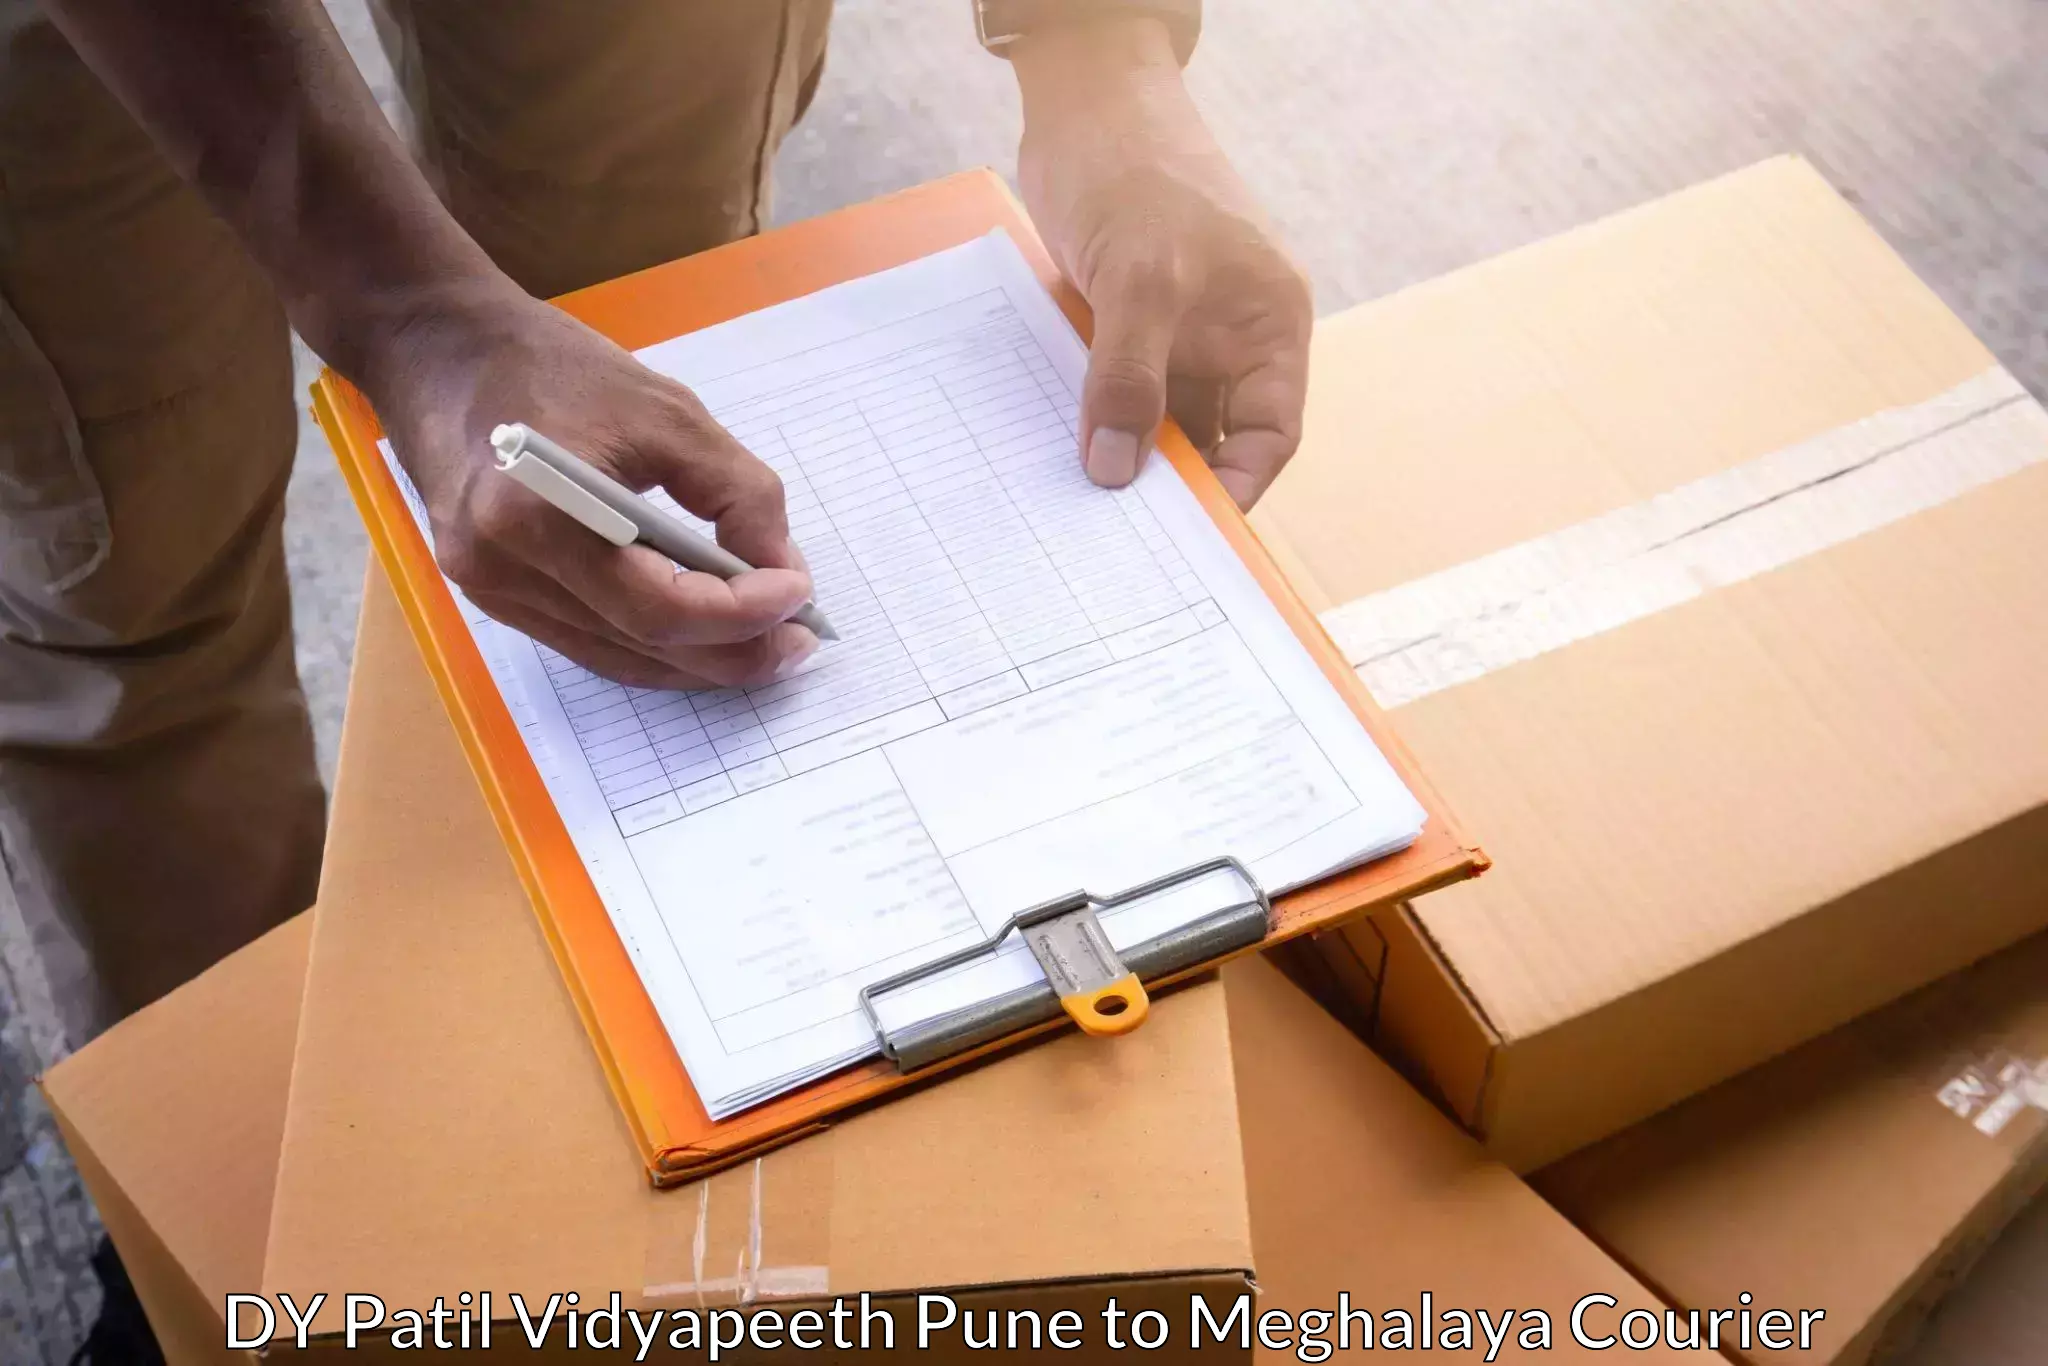 International courier networks DY Patil Vidyapeeth Pune to Tura